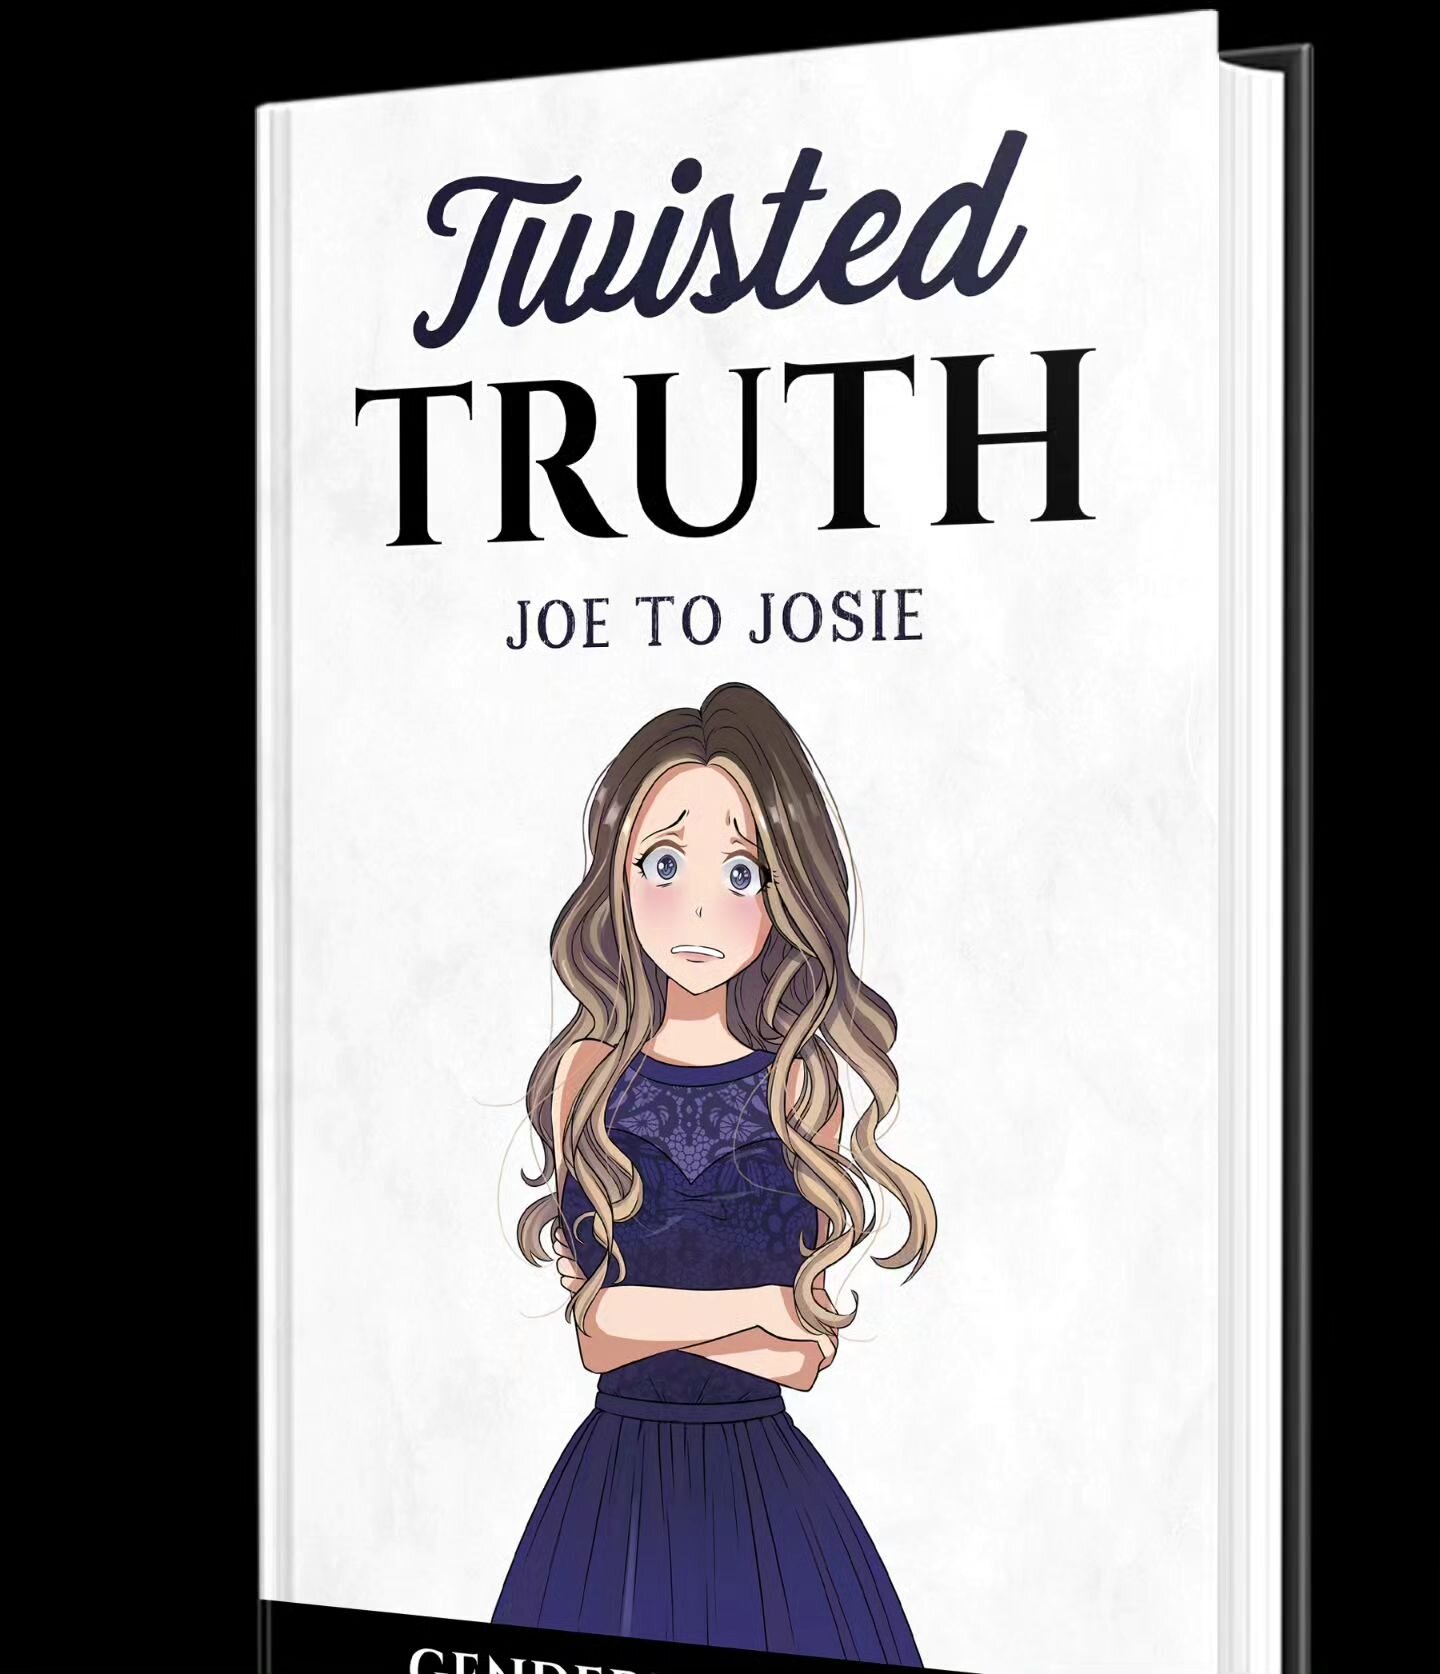 His twisted truth leads to his real truth!
Out now for kindle!
https://www.amazon.com/dp/B0CLK6ZDW6?ref=d6k_applink_bb_dls&amp;dplnkId=95699b9d-91e6-47de-abee-67b2c8a20ae3
Joe's desperate to keep his affair secret. How far will he go to do so?? 

#cr